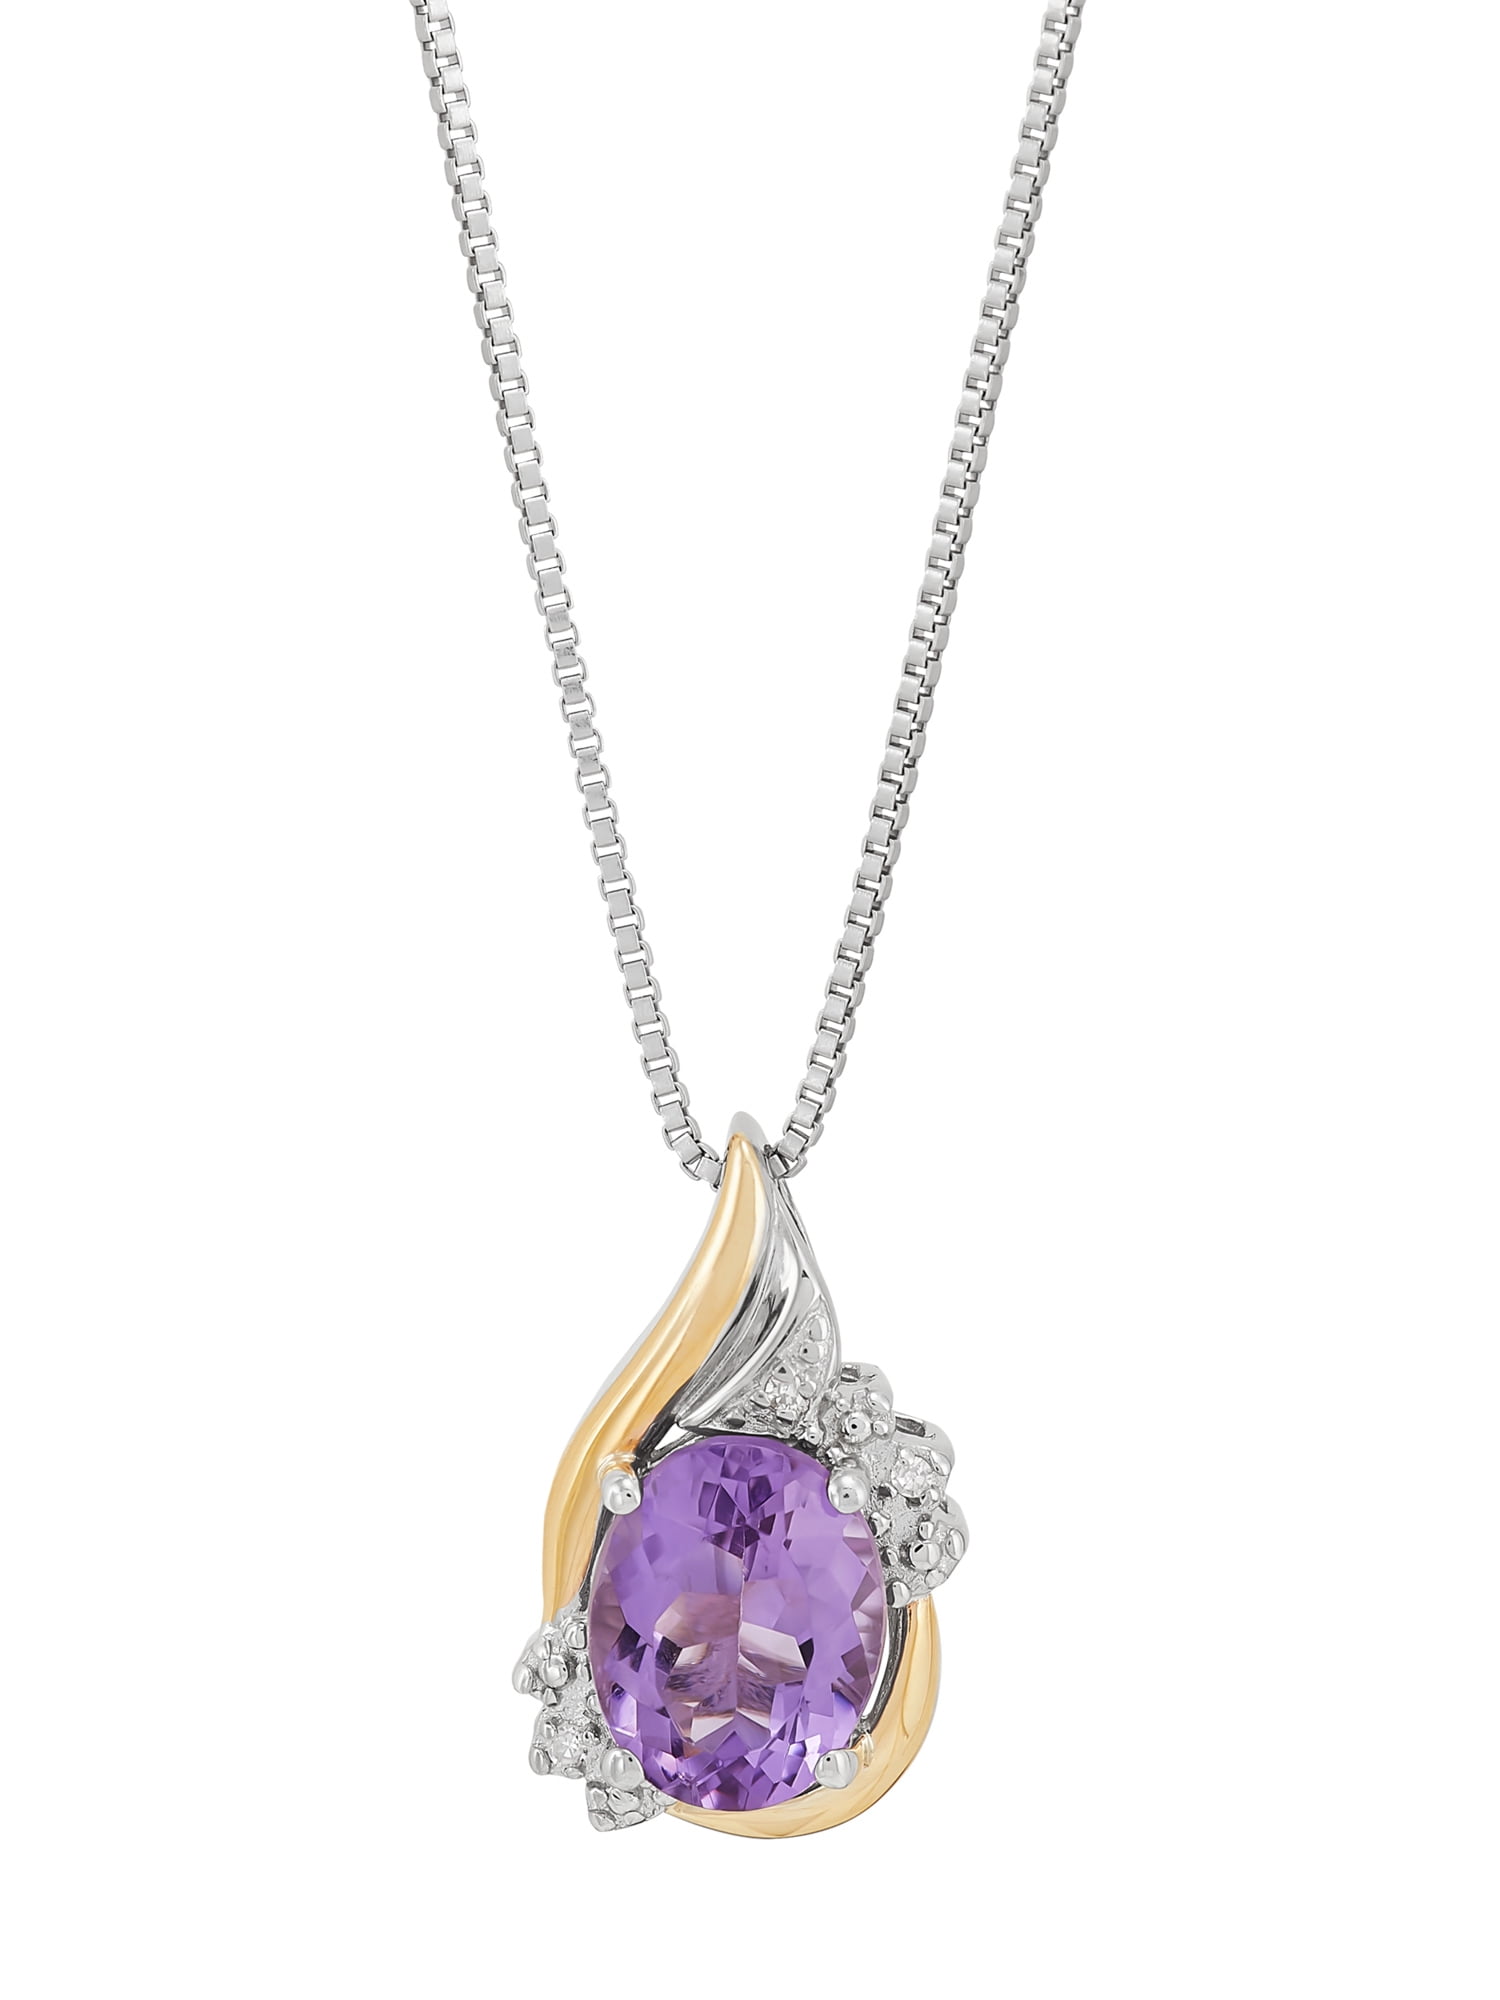 Brilliance Fine Jewelry Amethyst and Diamond Accent Birthstone Pendant Necklace in Sterling Silver with 10kt Yellow Gold, 18"